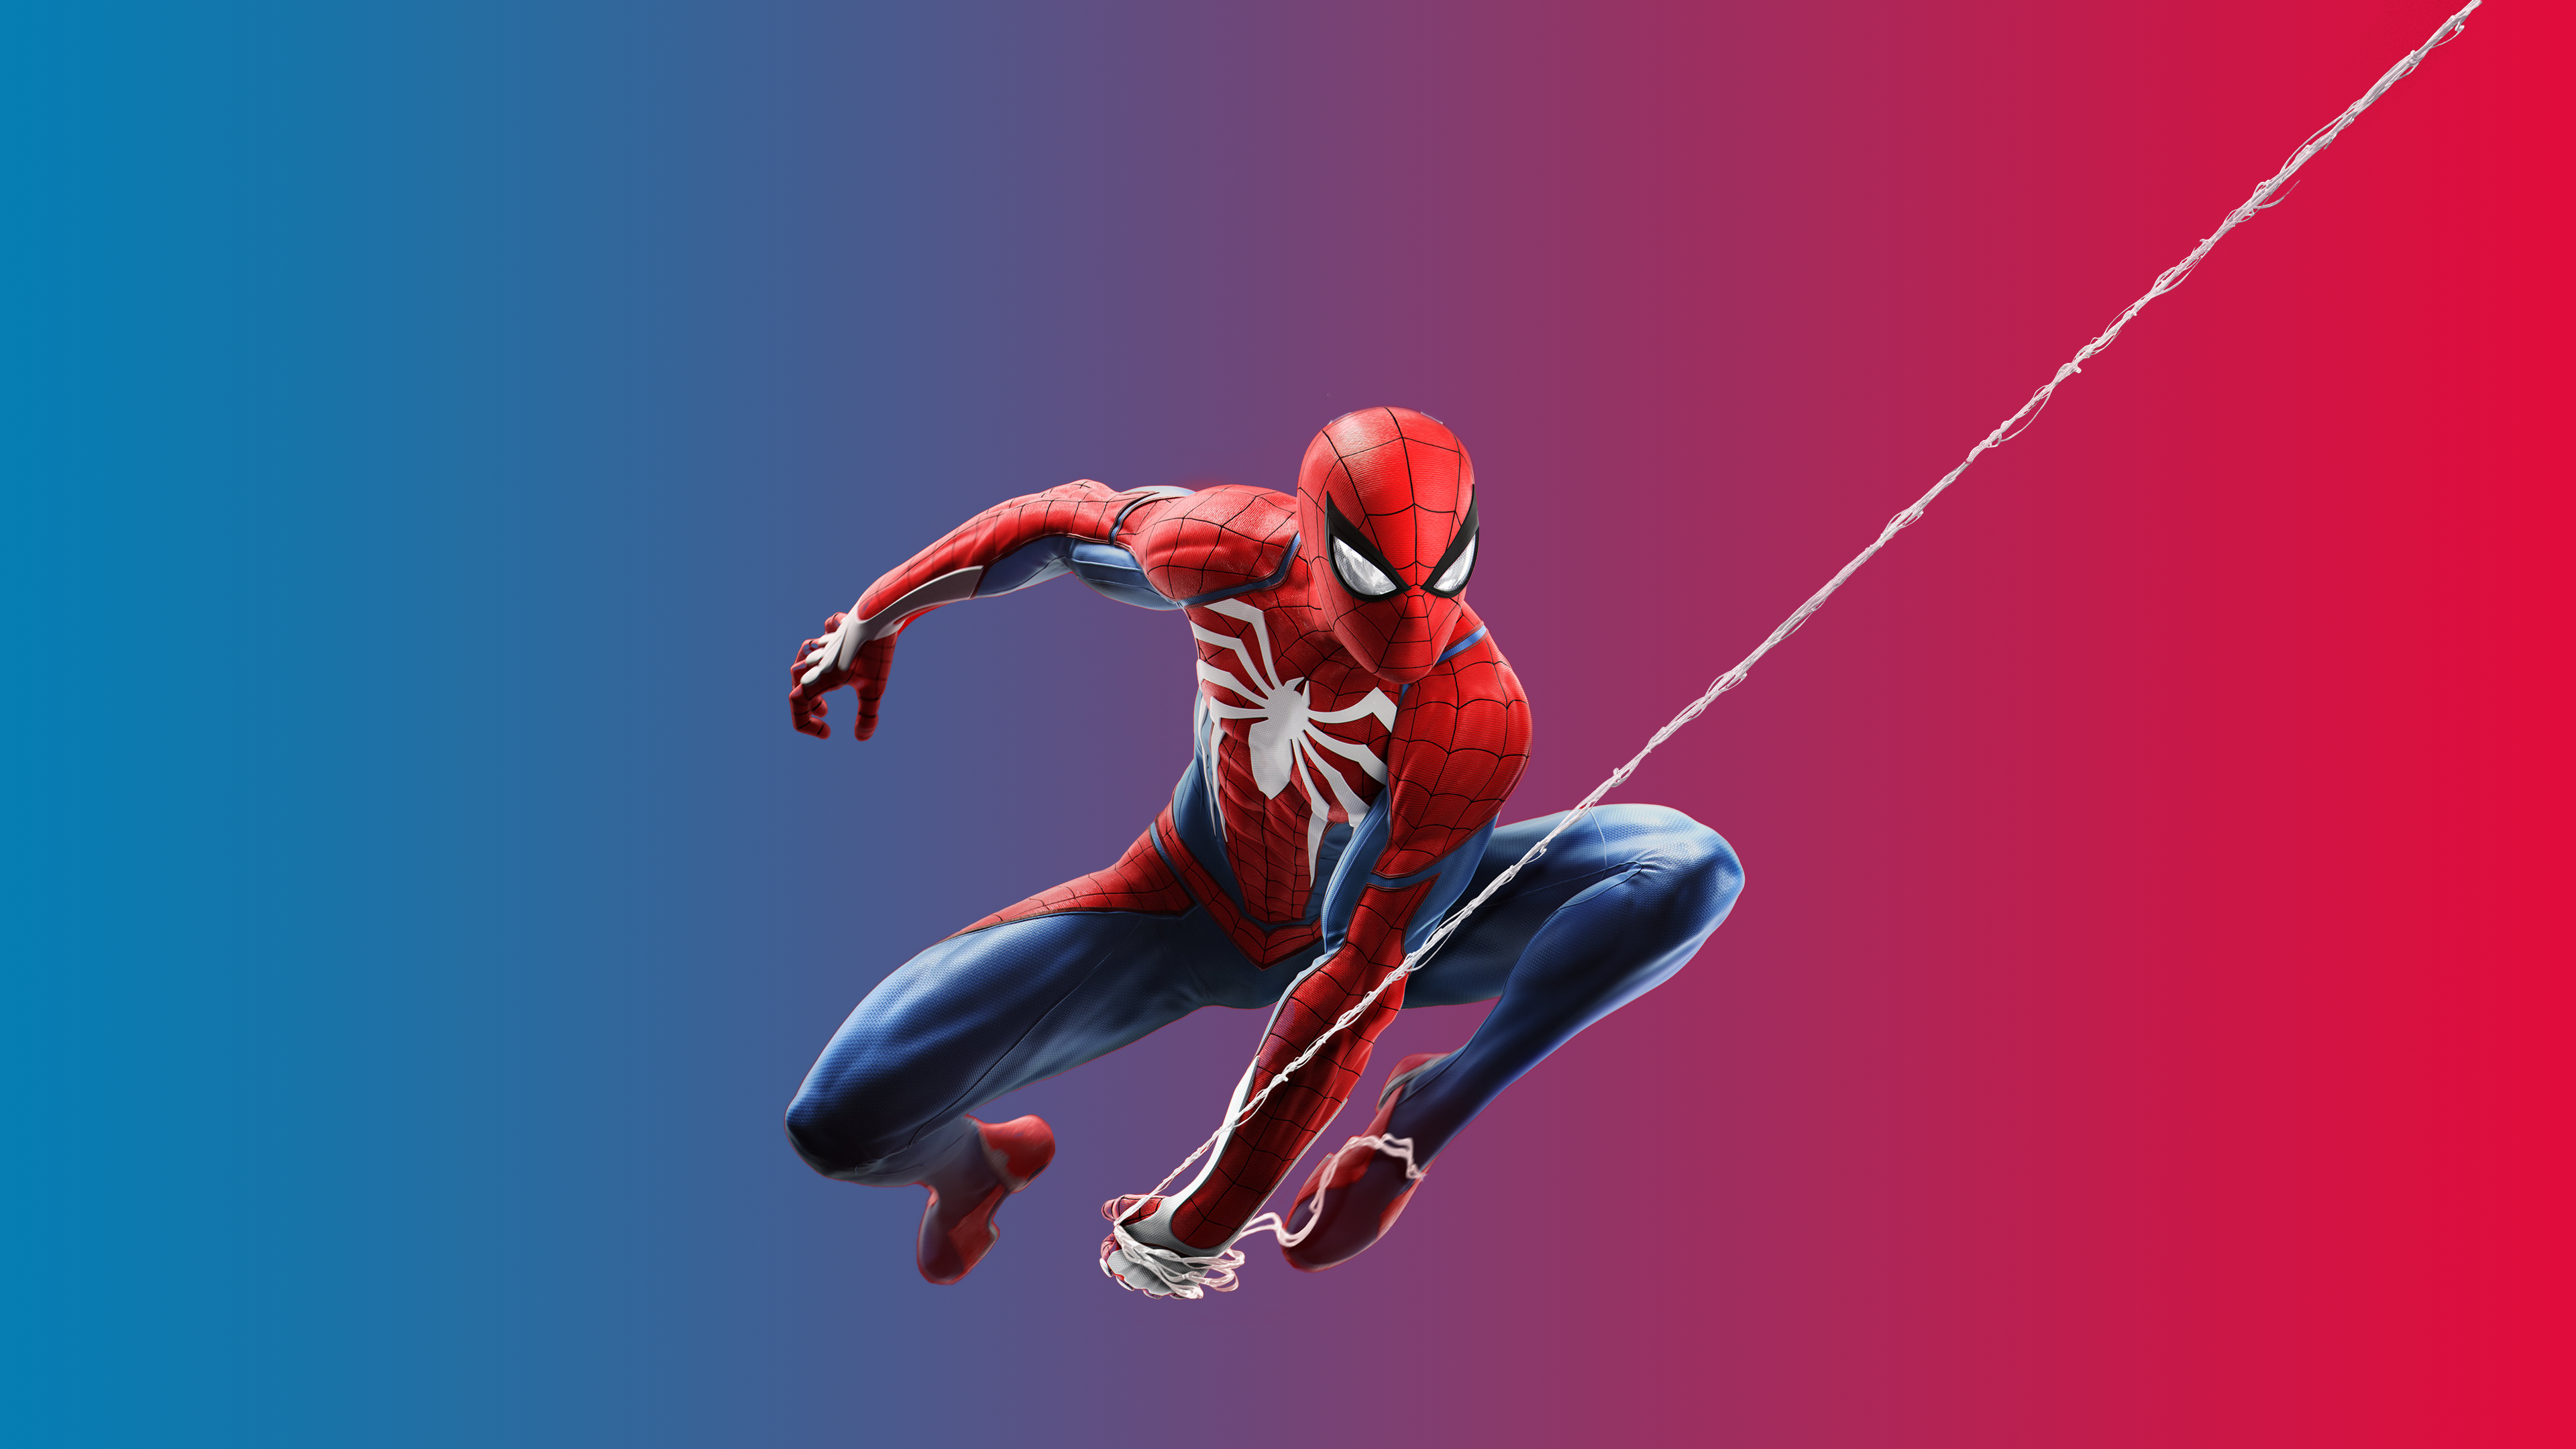 Wallpaper Playstation 4 With Spiderman, PlayStation 4 Pro, Spider-man,  Playstation Vr, Nintendo Switch, Background - Download Free Image